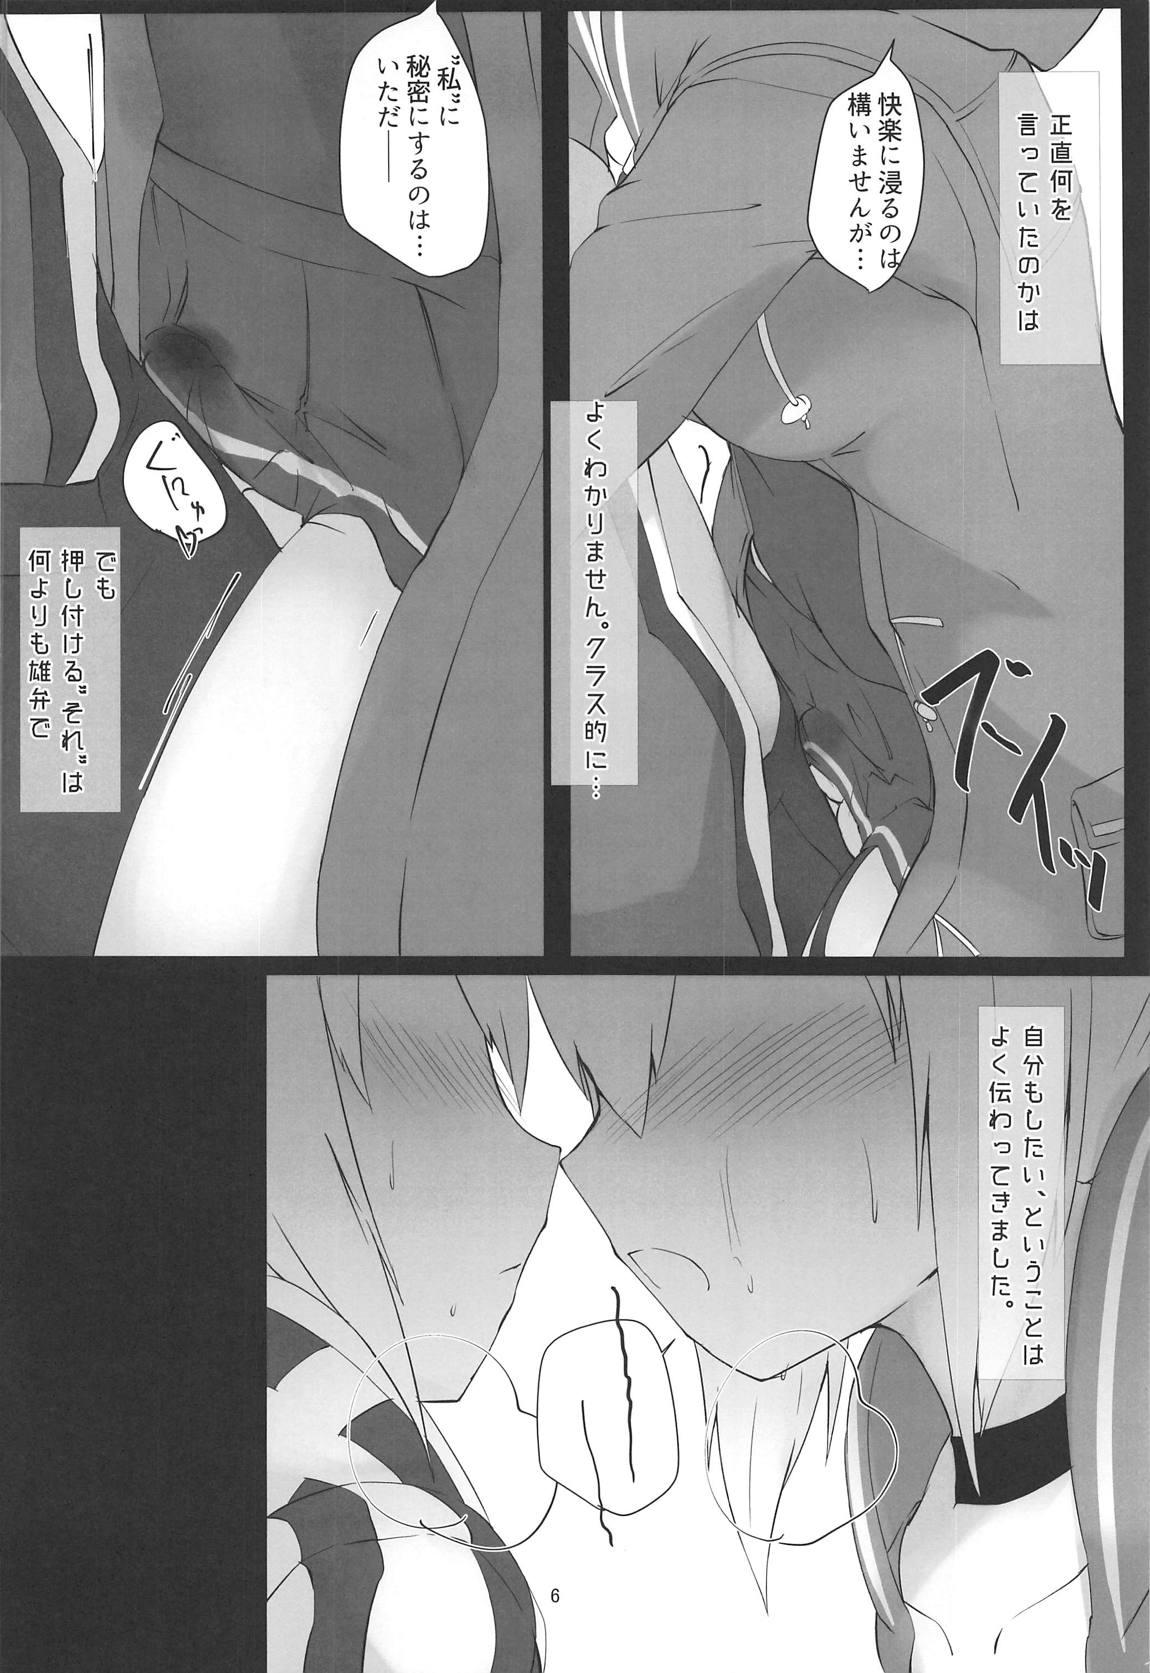 She eXXpose herself+ - Fate grand order Uncensored - Page 5